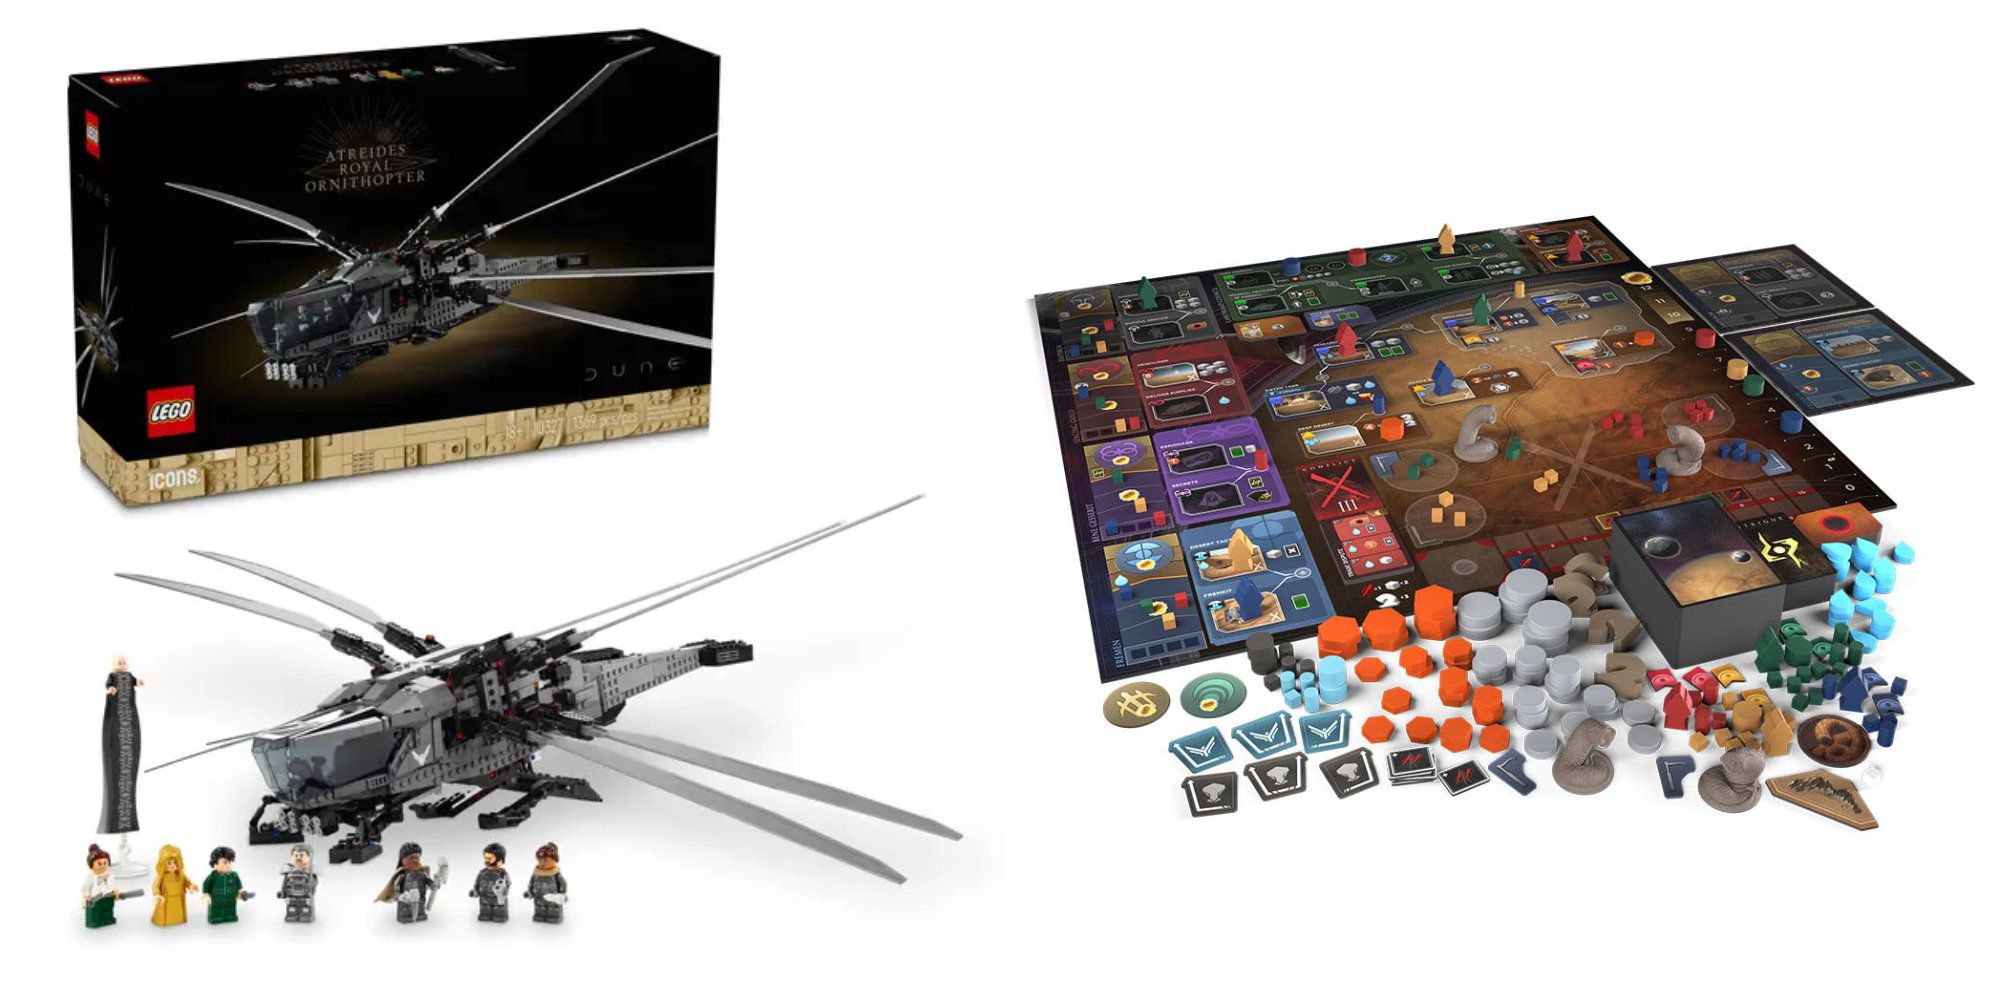 Dune gifts lego and board game side by side